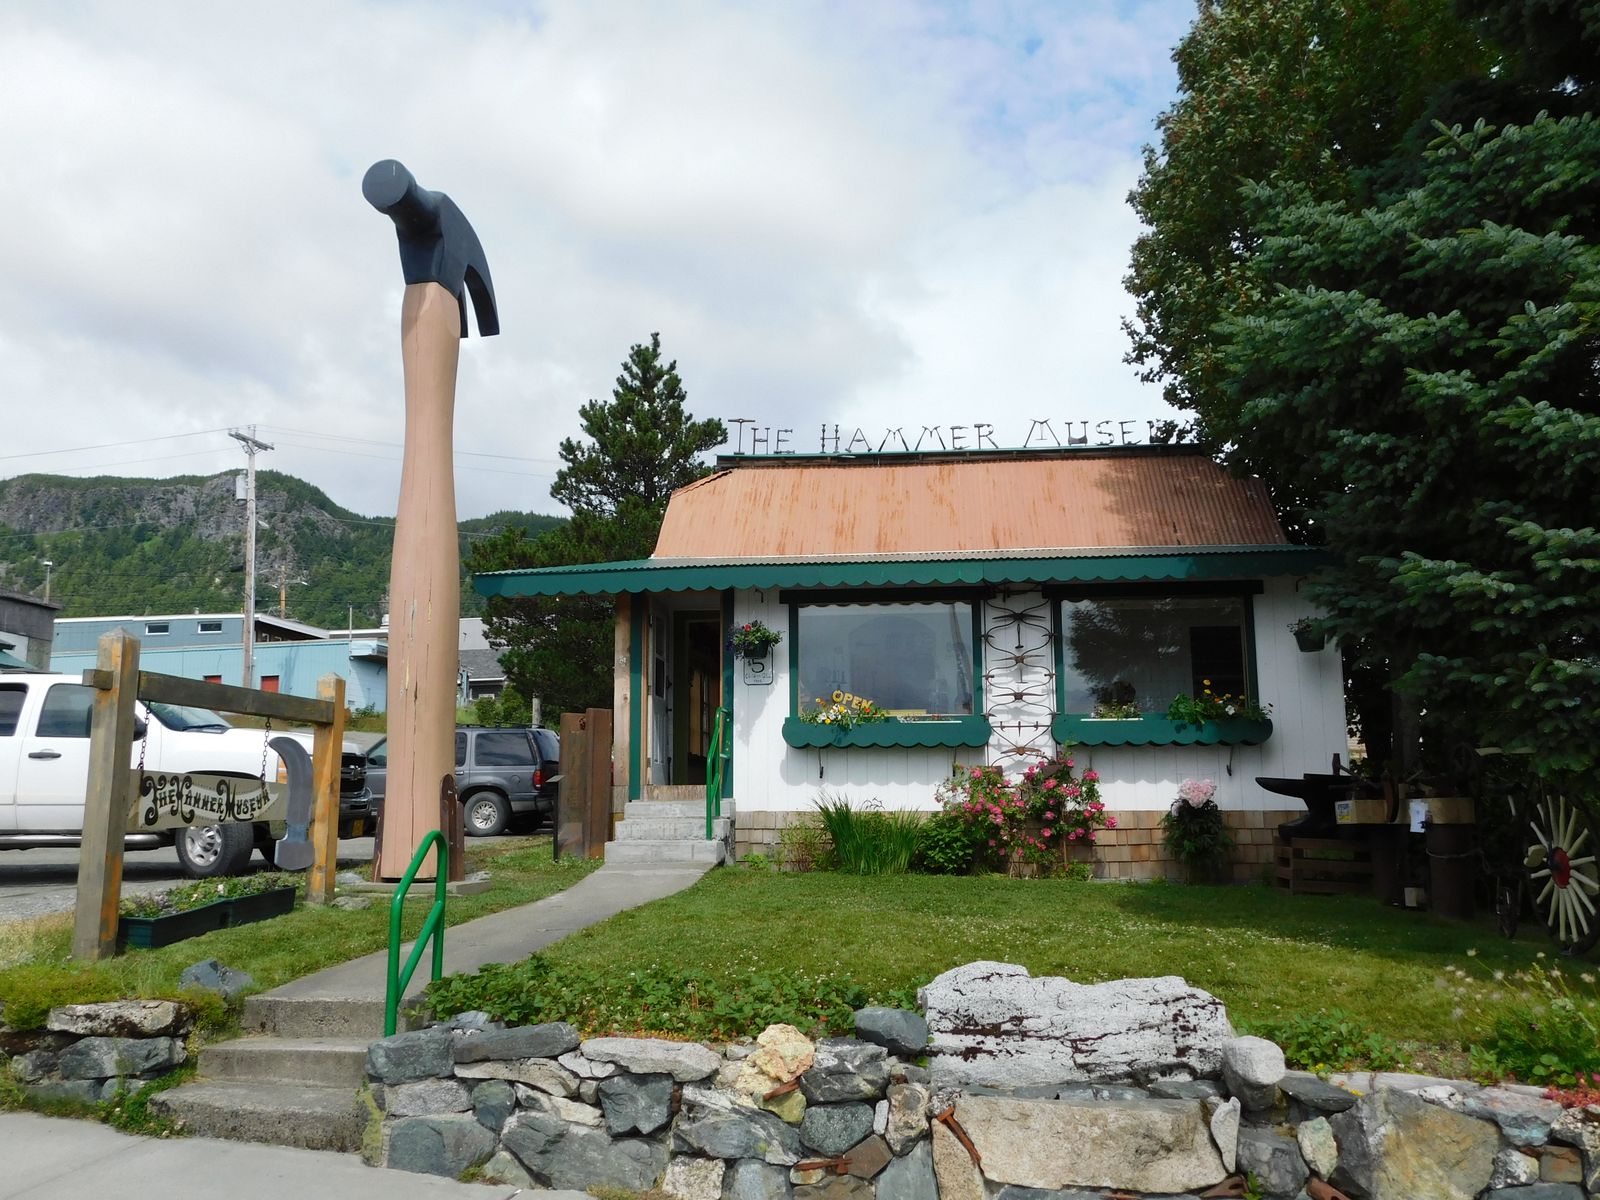 A Small Town in Alaska Is Home to the World's First Hammer Museum